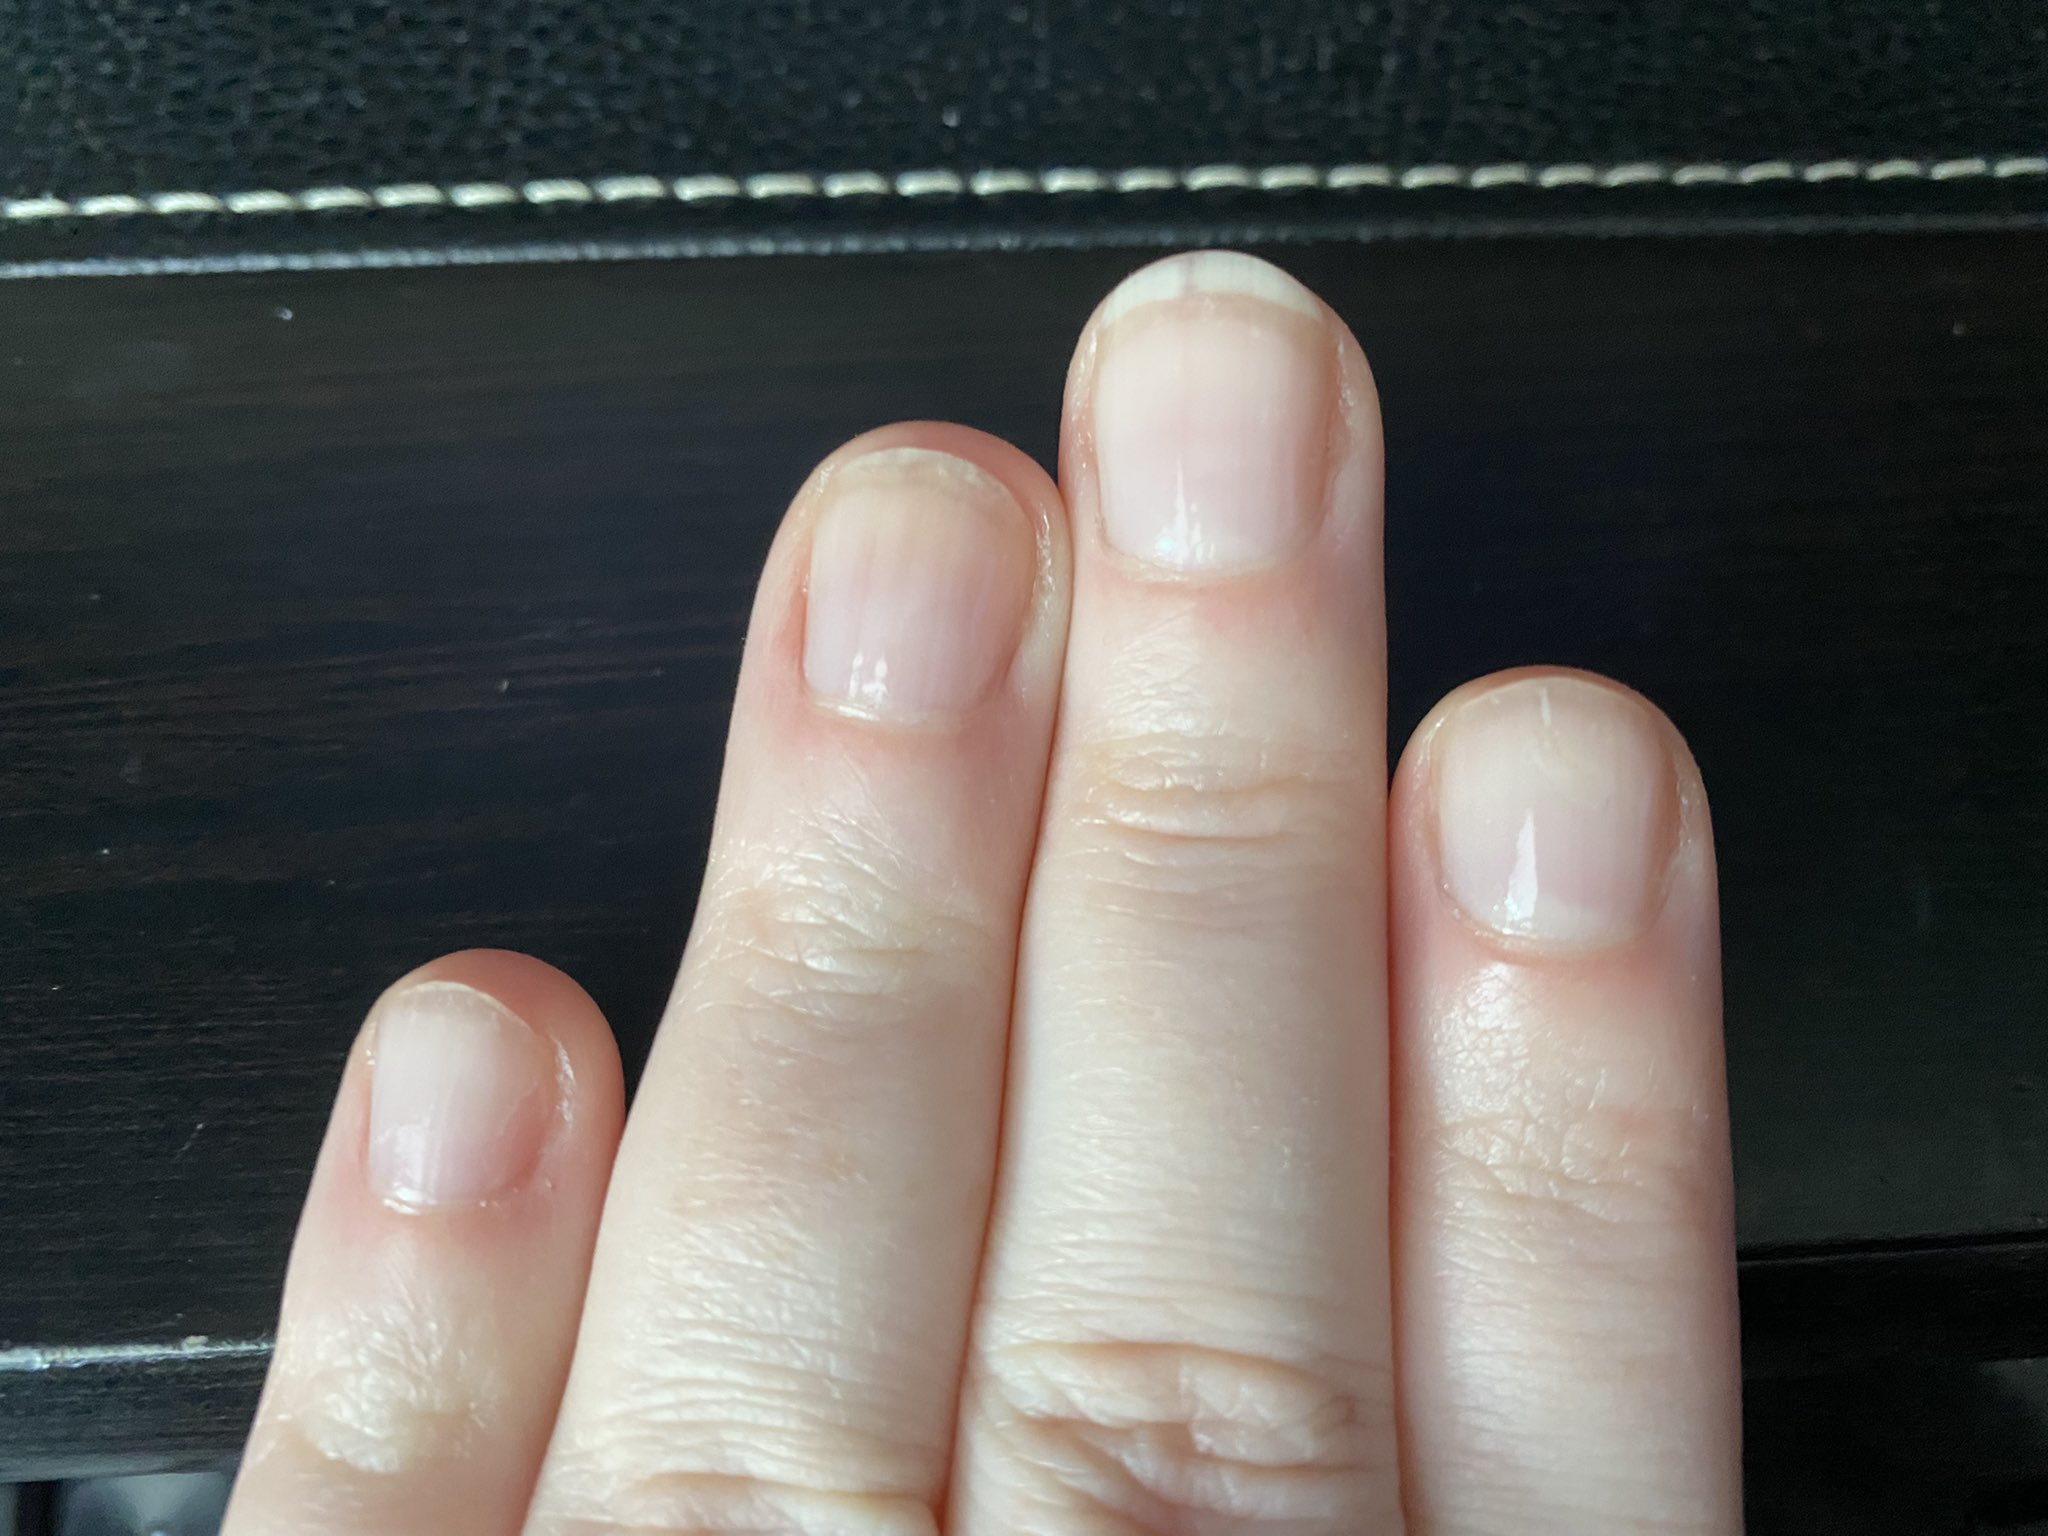 Brown Line on Nails: Vitamin Deficiencies and Other Causes